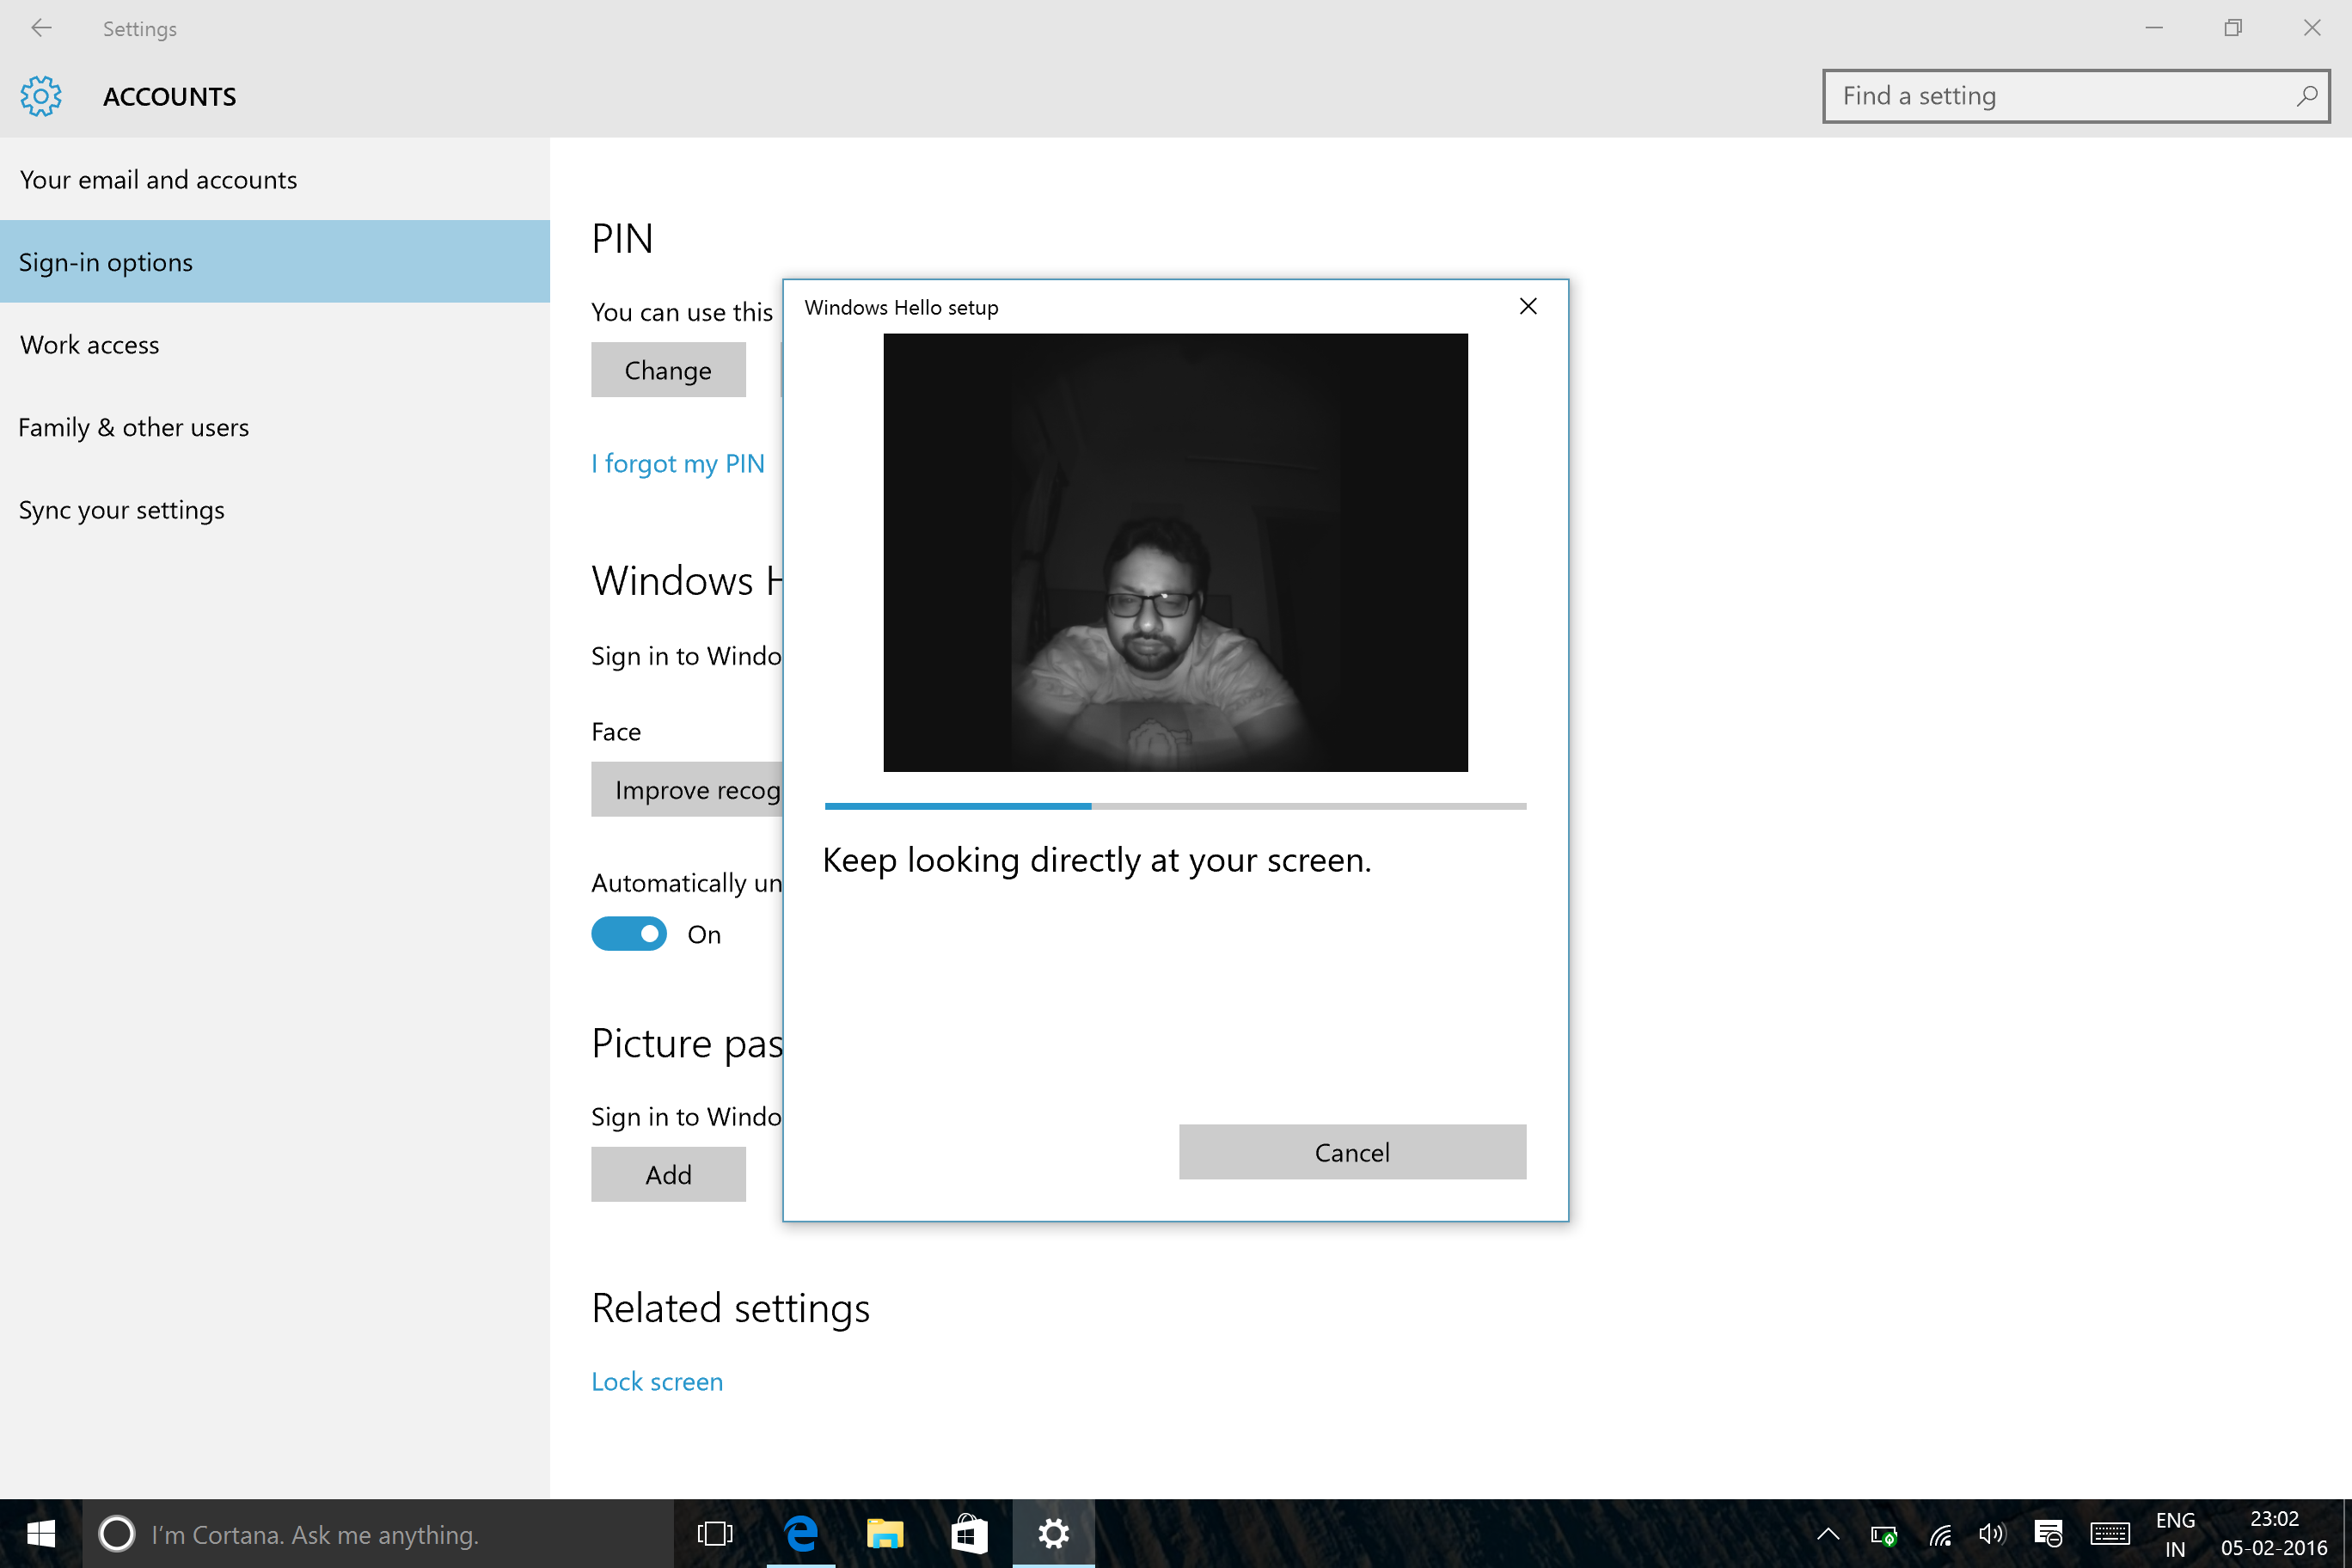 How to Fix the Webcam Freezing issue on Windows 10